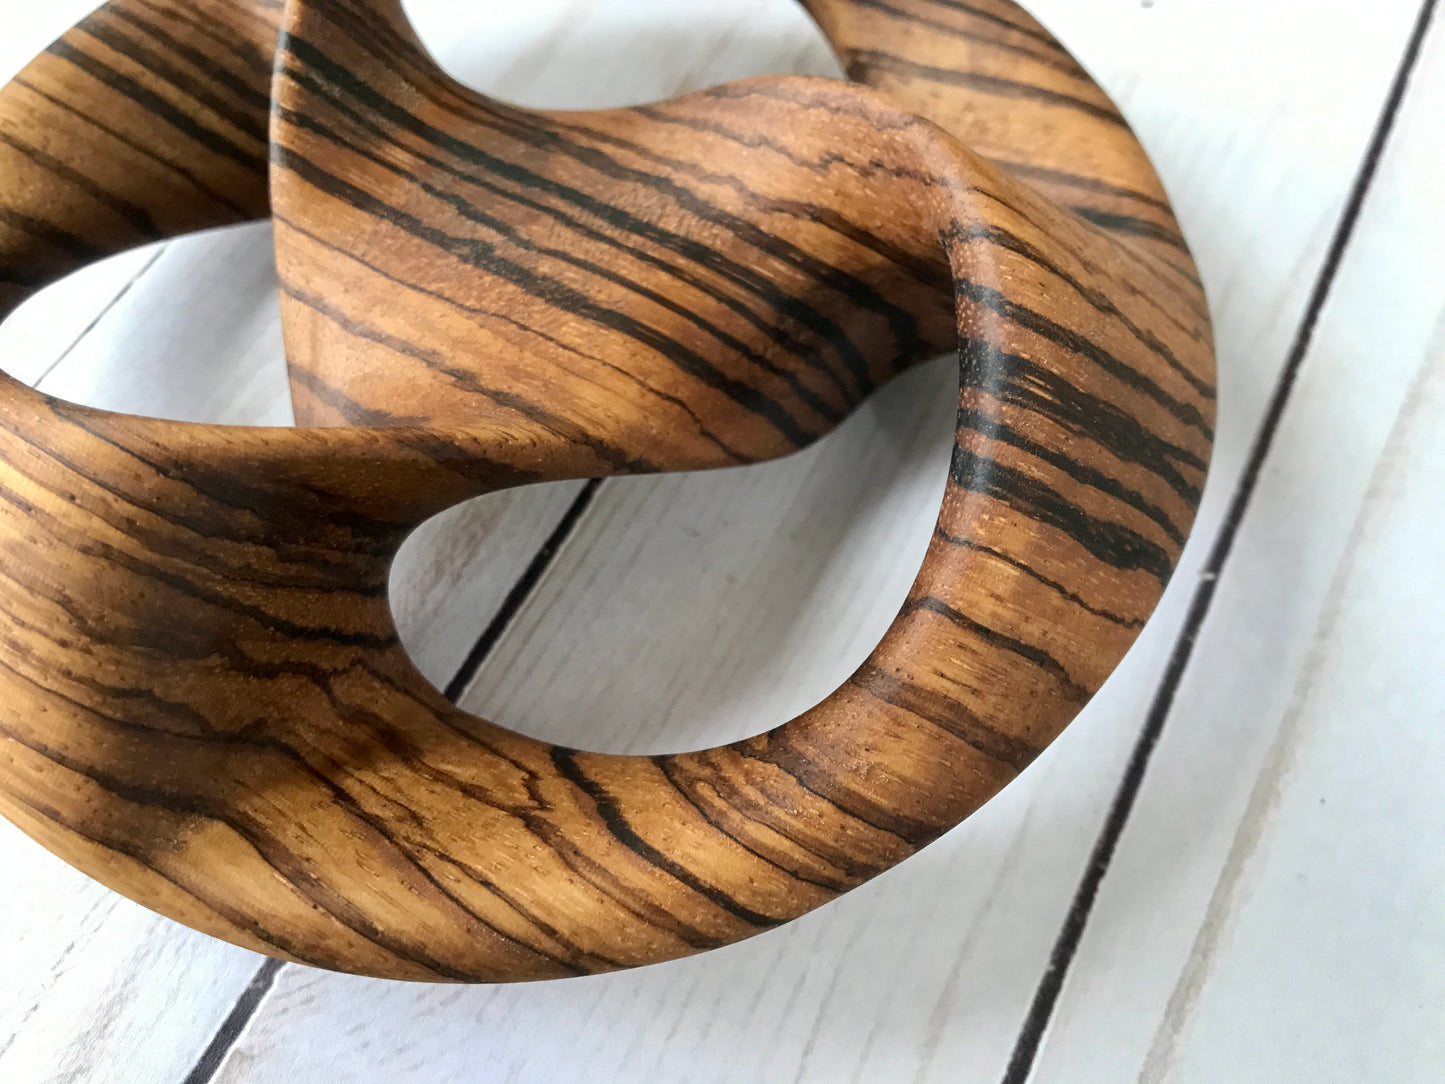 Triquetra Mobius Strip-like Wooden Sculpture, ZebraWood, 5"